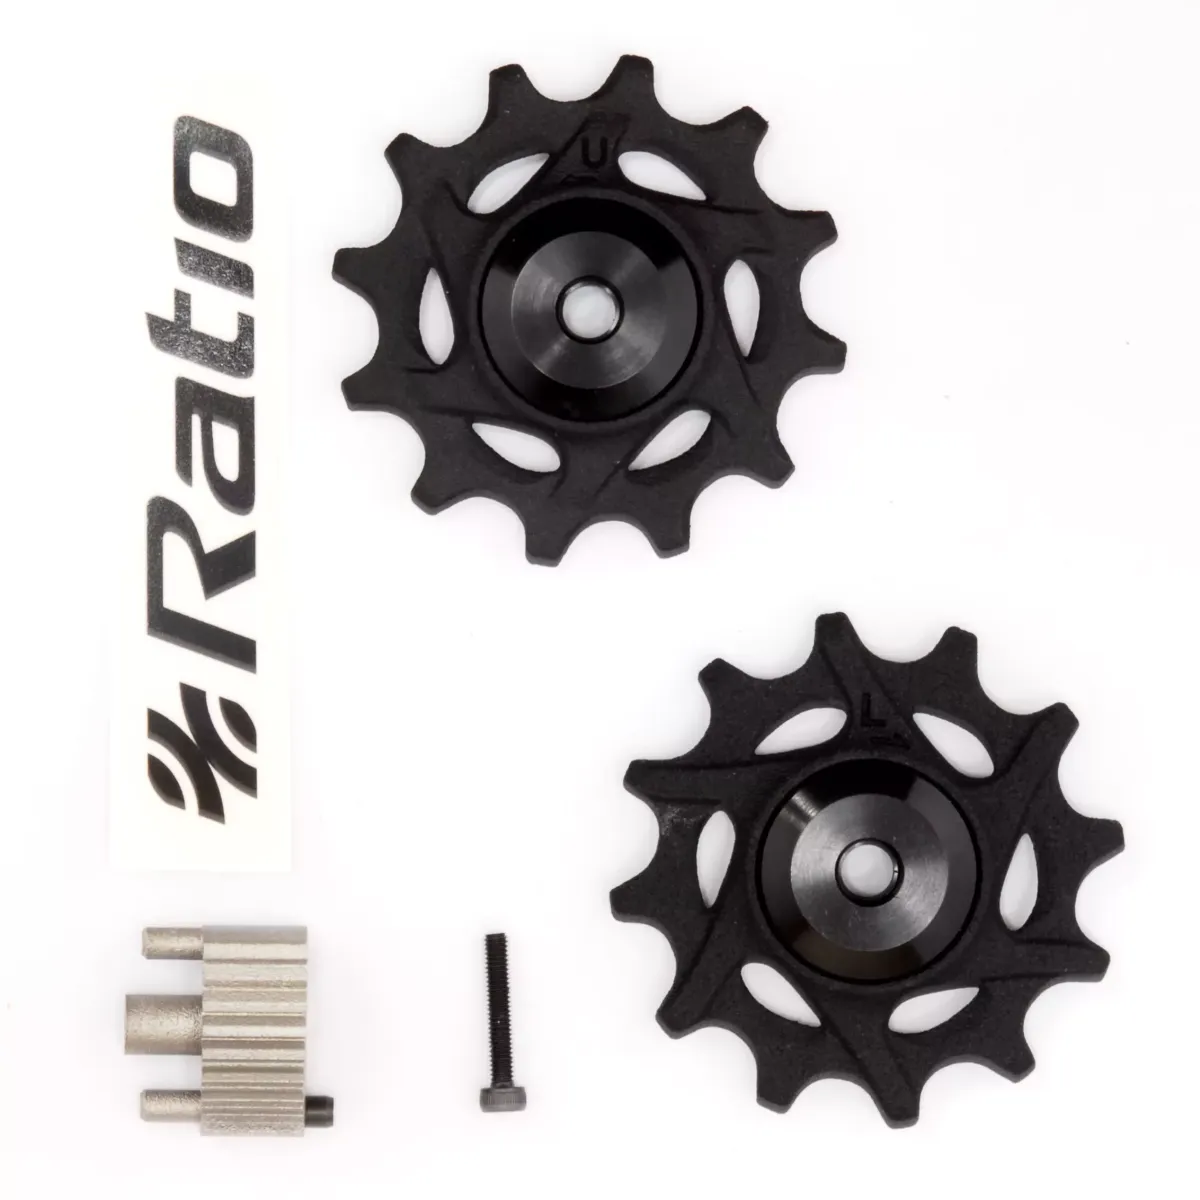 Ratio's 1×12 Road Upgrade Kit Converts 10 or 11 Speed to 12